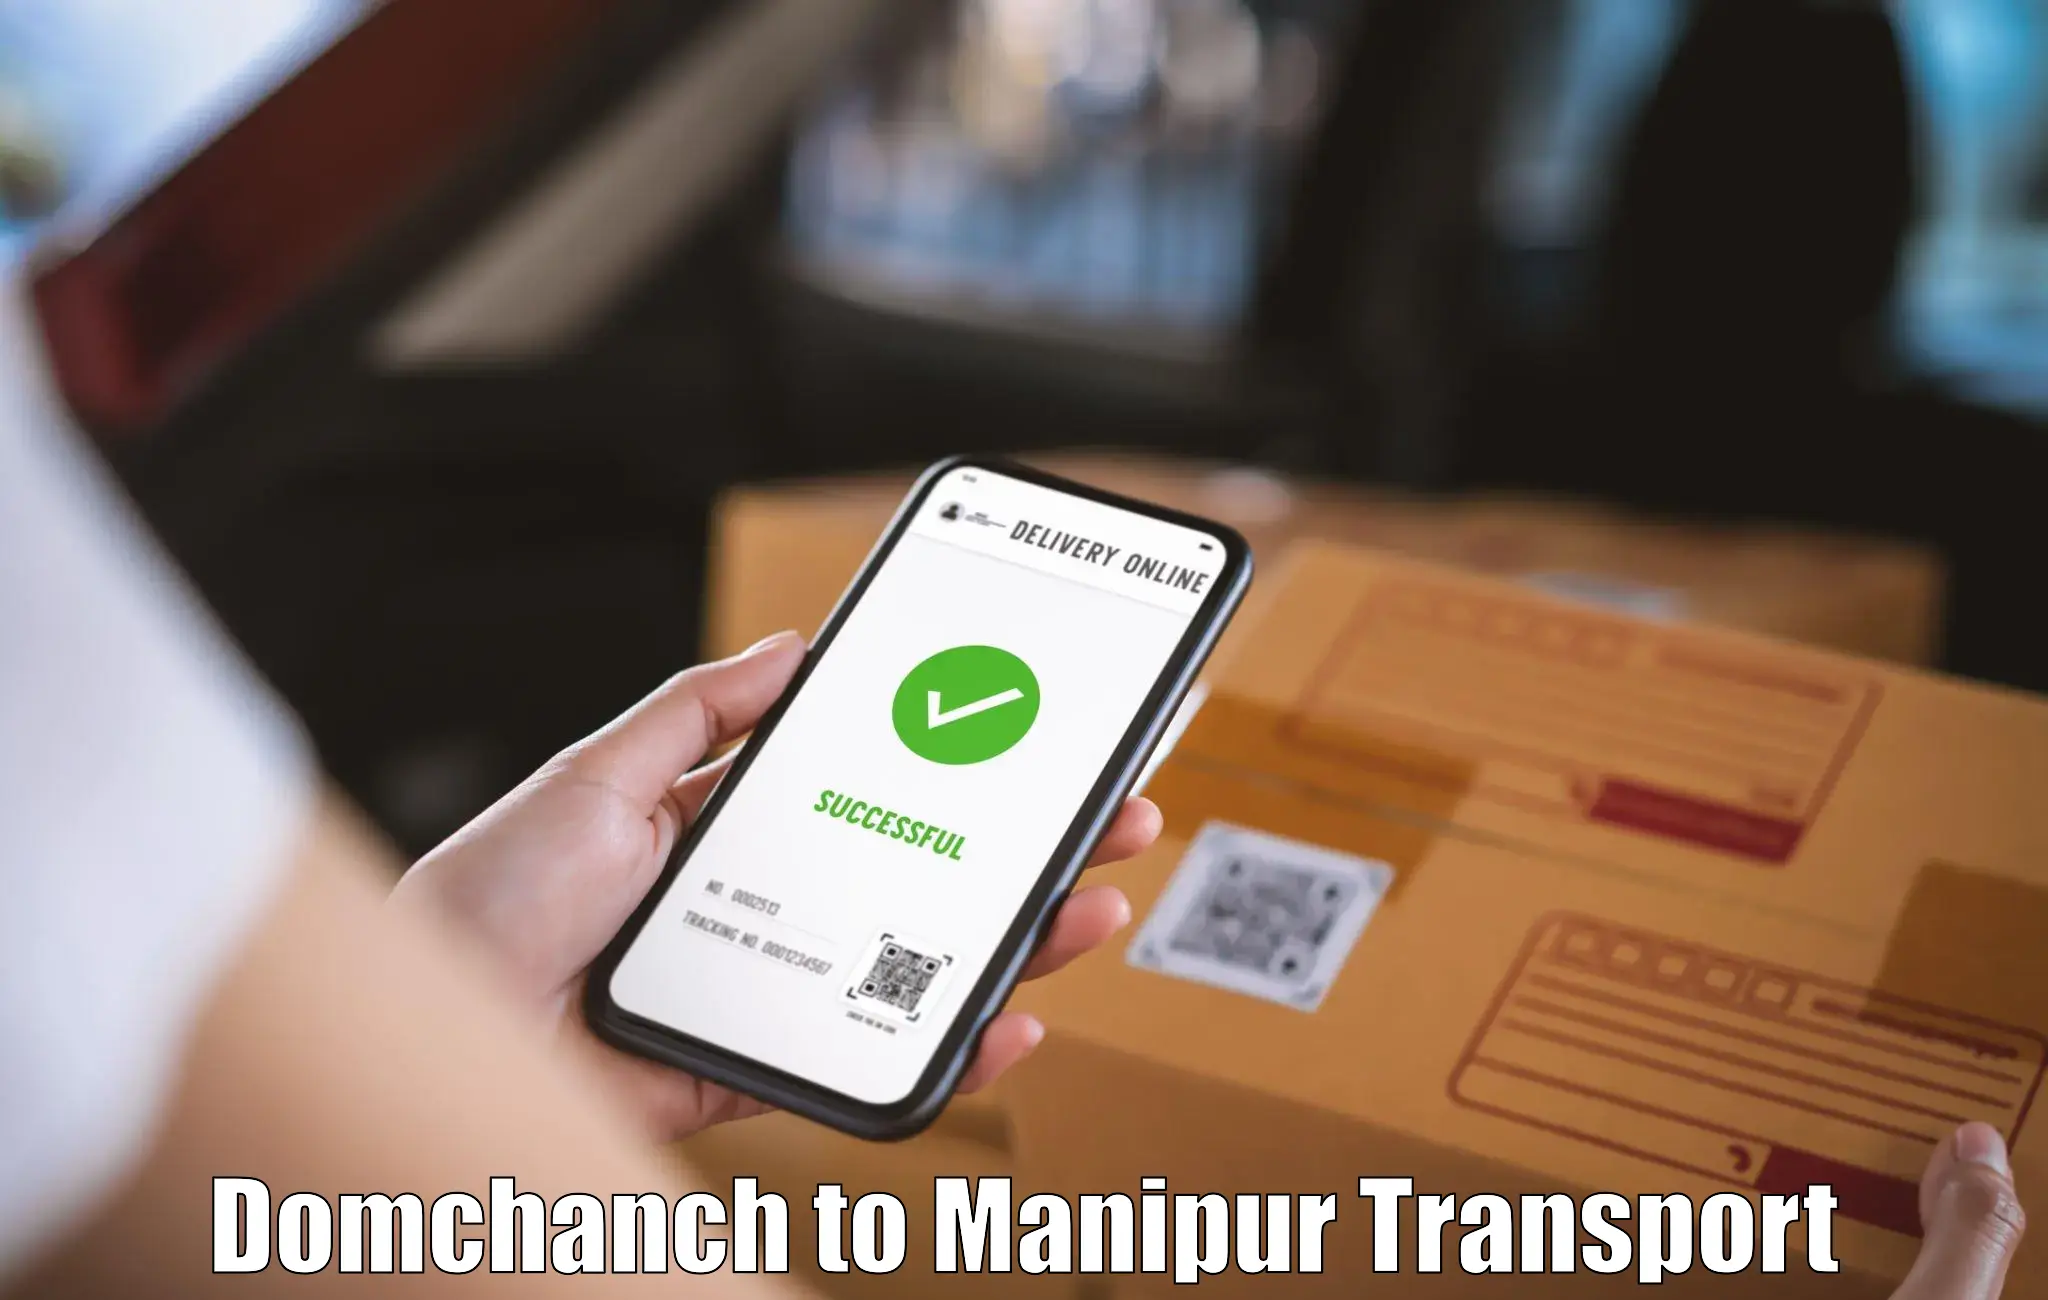 Nearby transport service Domchanch to Manipur